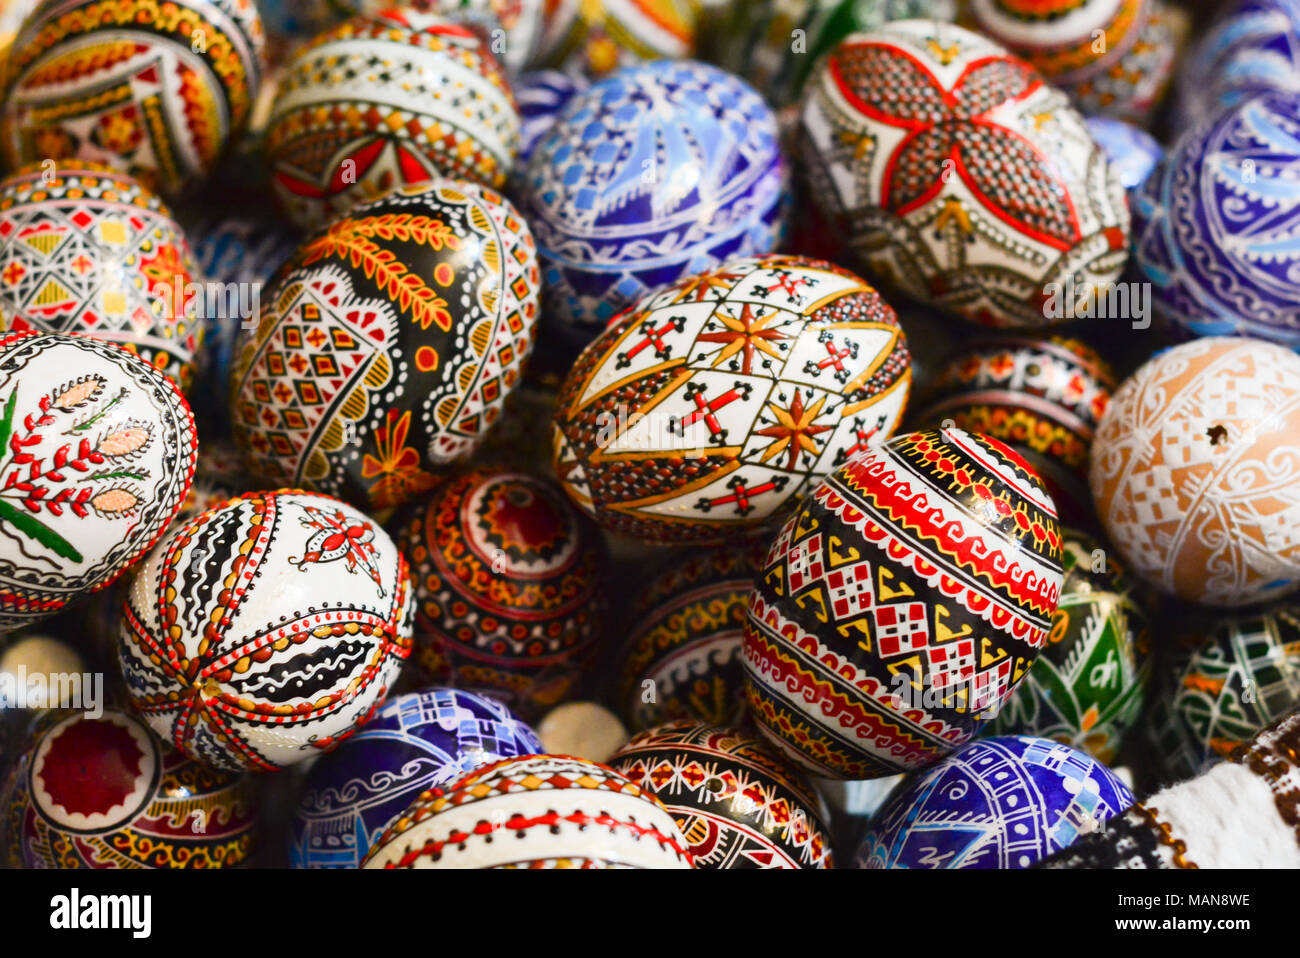 Traditional painted eggs for the orthodox Easter in the region of Bucovina, Romania Stock Photo